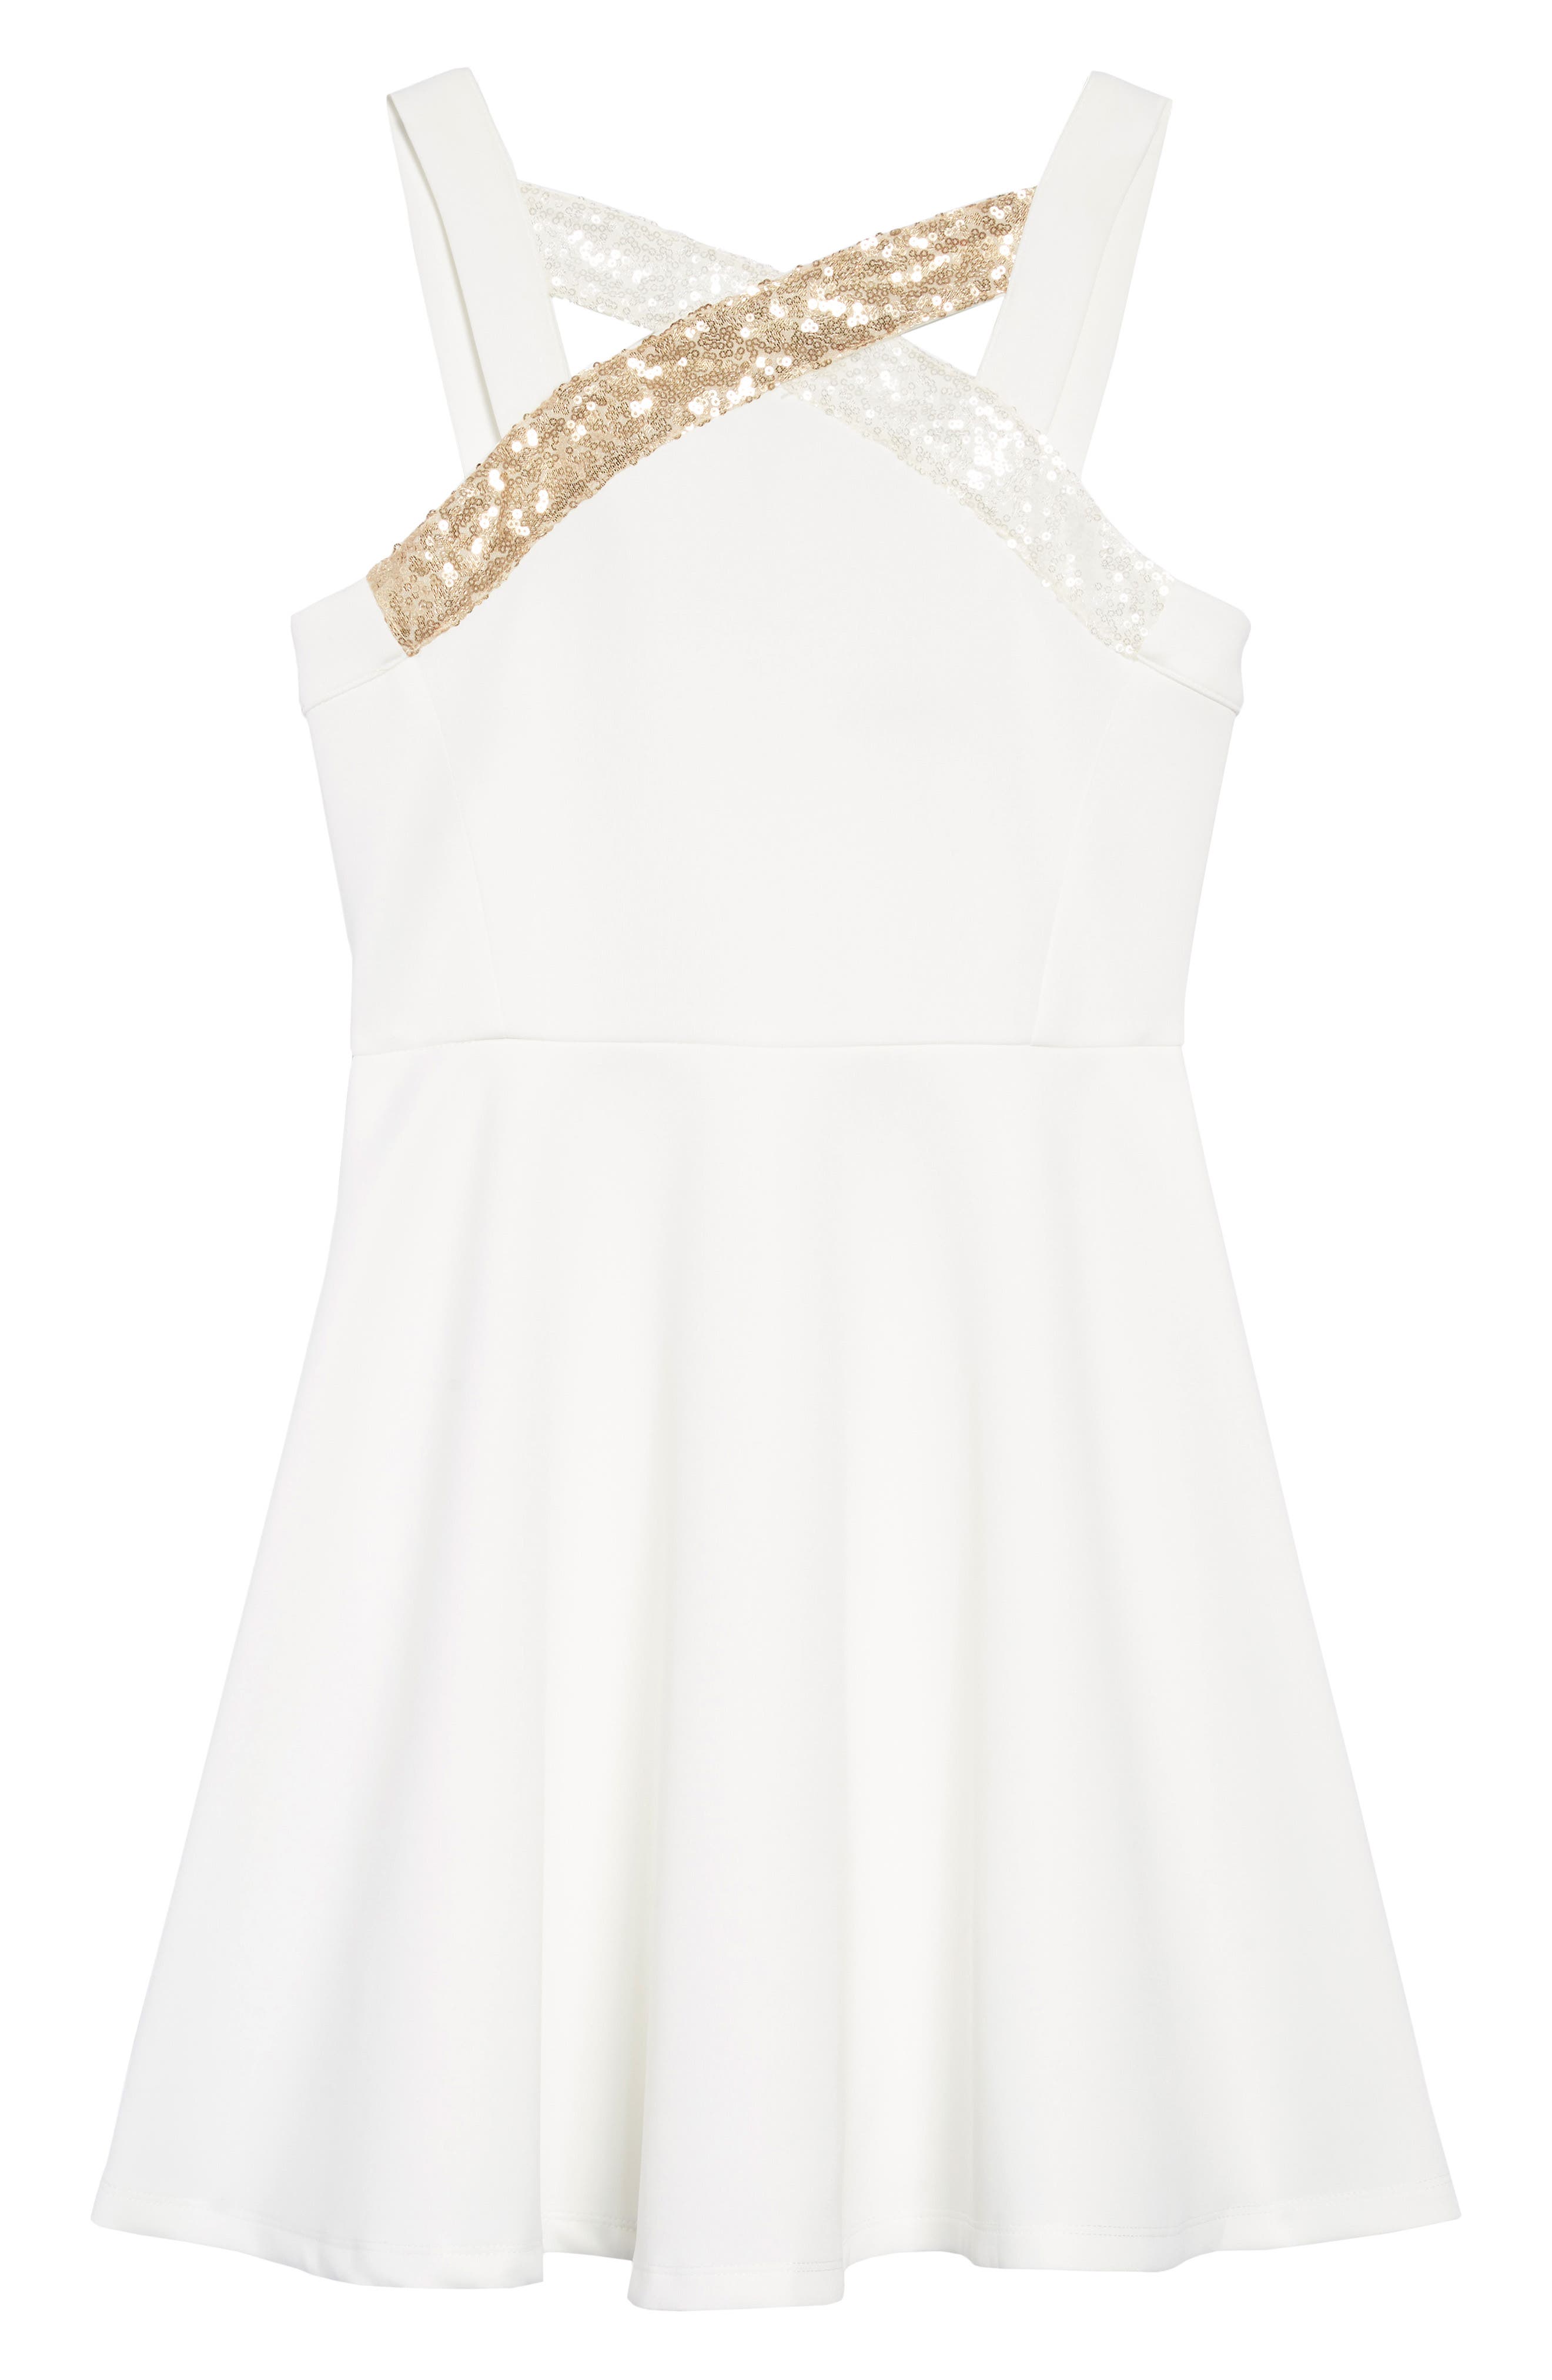 Image of white dresses or rompers